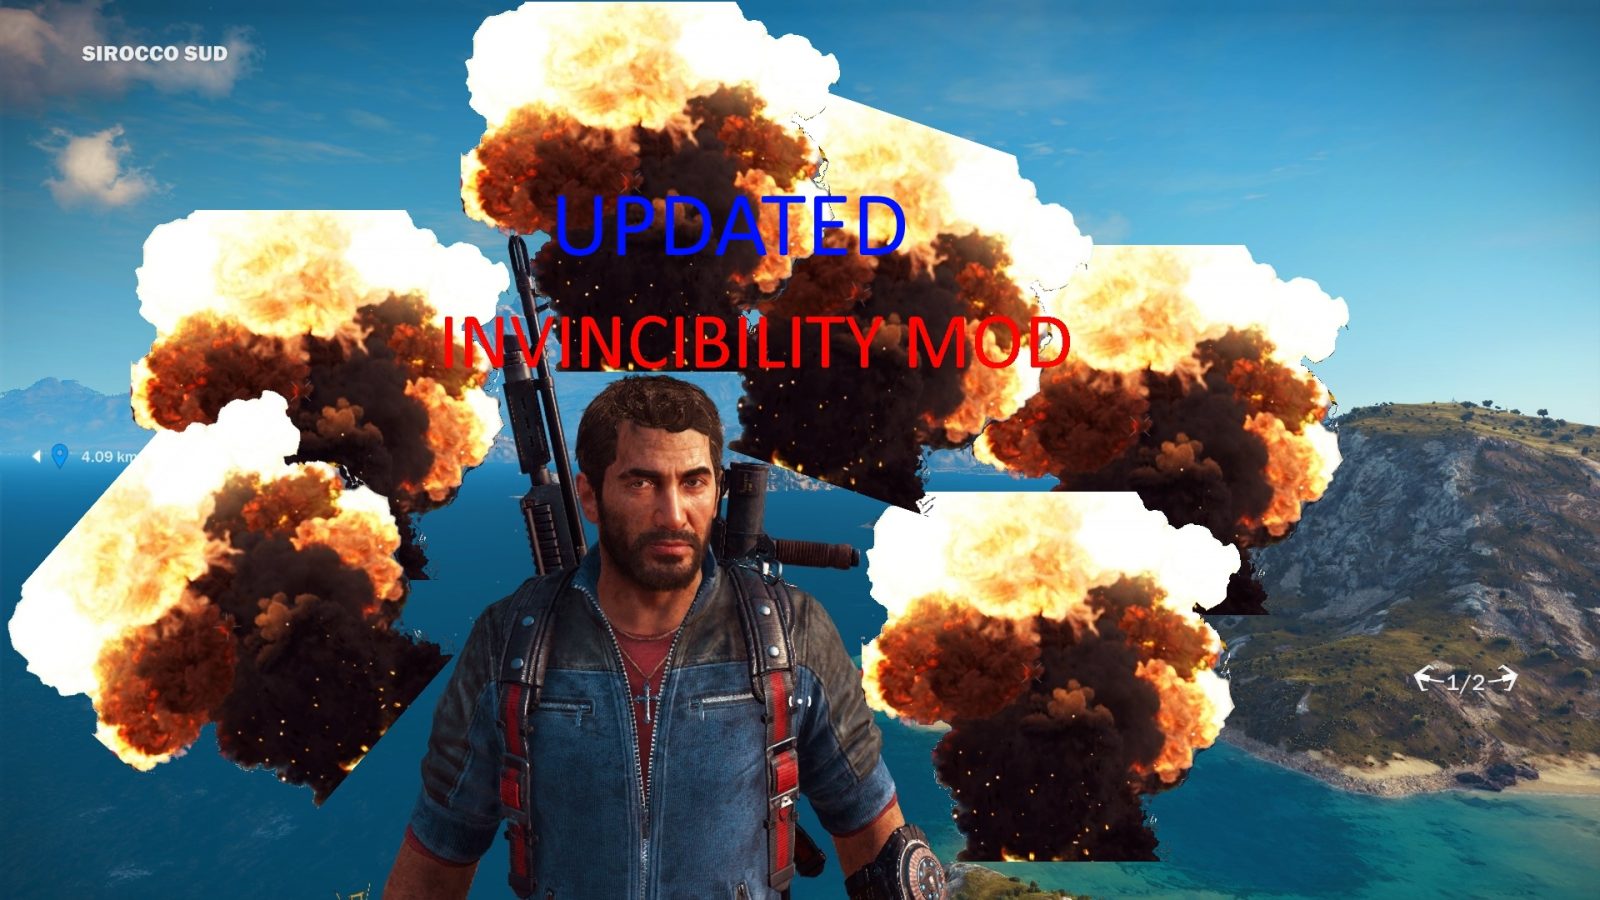 just cause 2 mods invincible vehicles